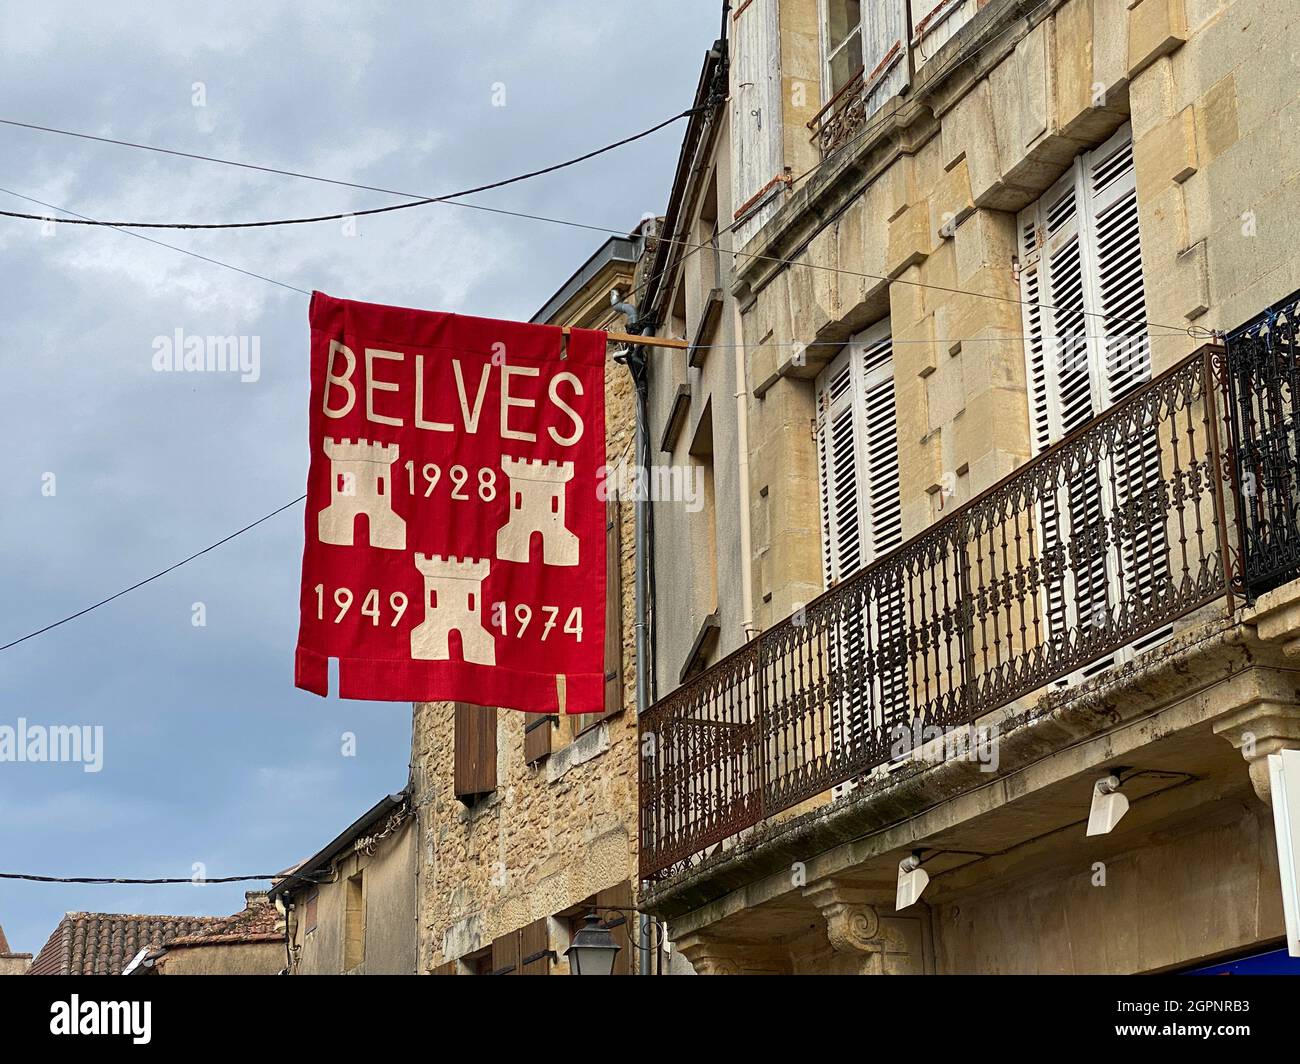 Belves town sign hanging in the street. Belves is onr of the prettiest towns in France Stock Photo